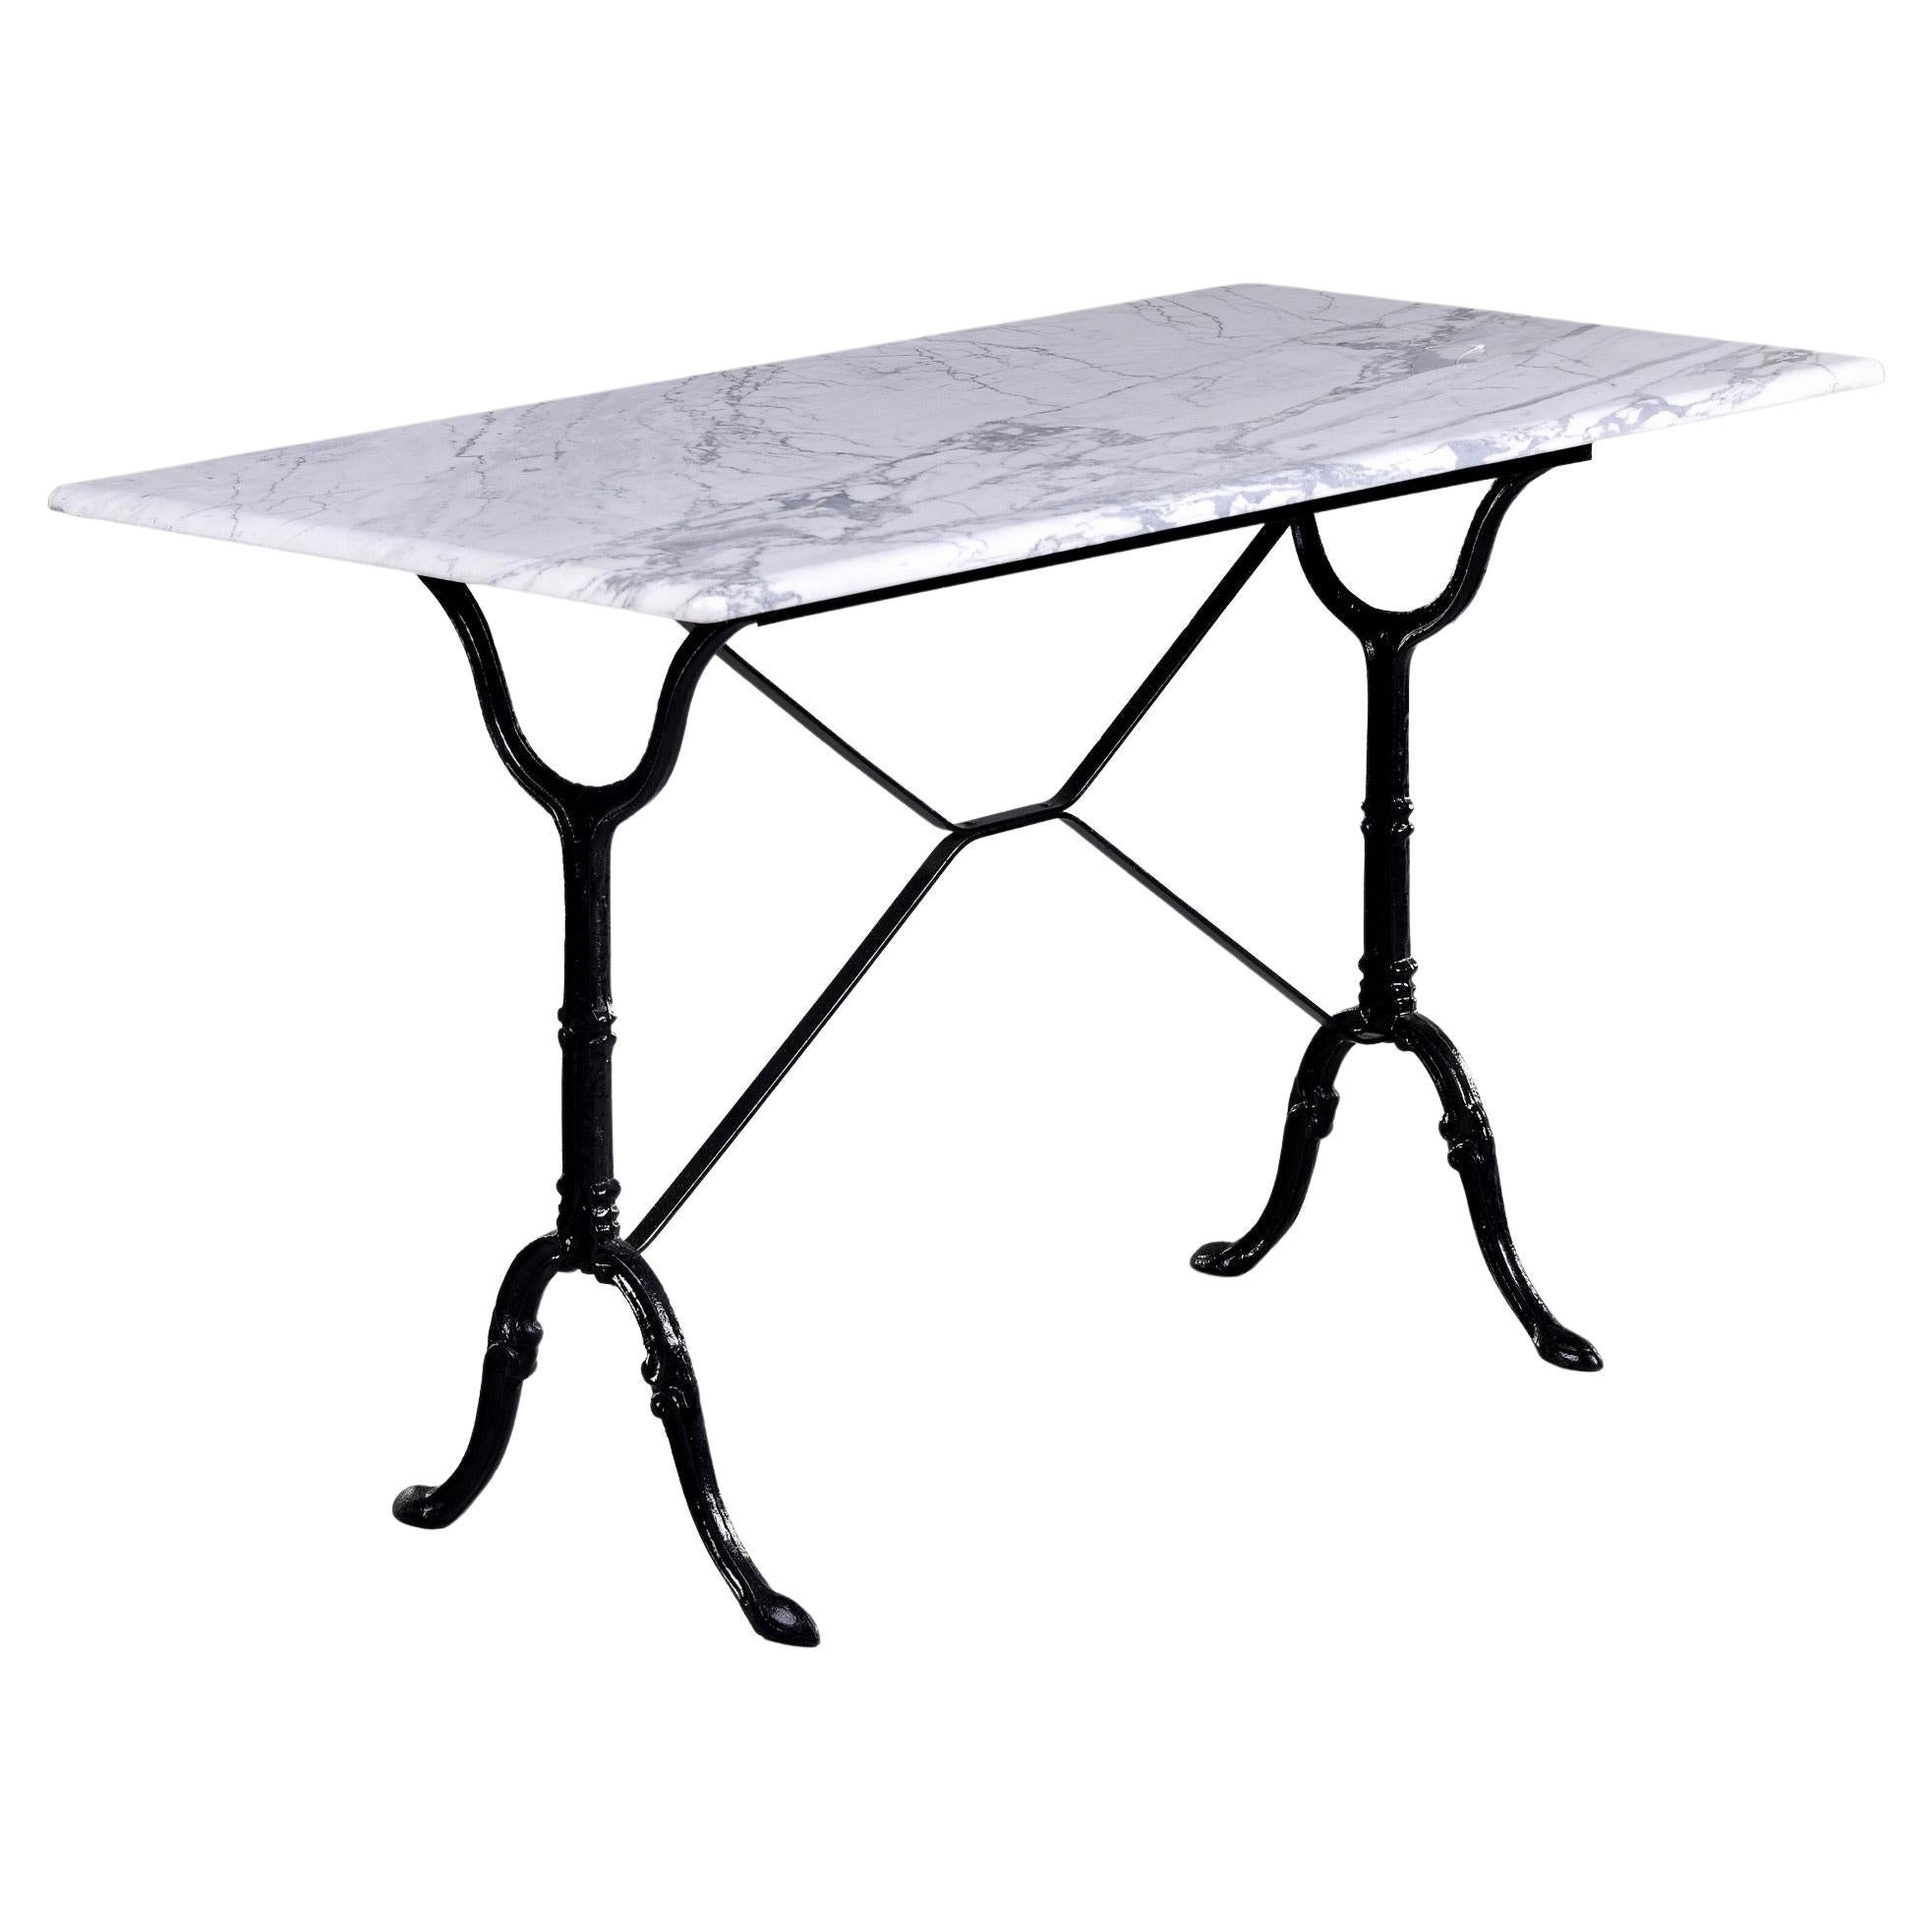 Early 20th C French Iron Base Bistro Table with Rectangular Carrara Marble Top